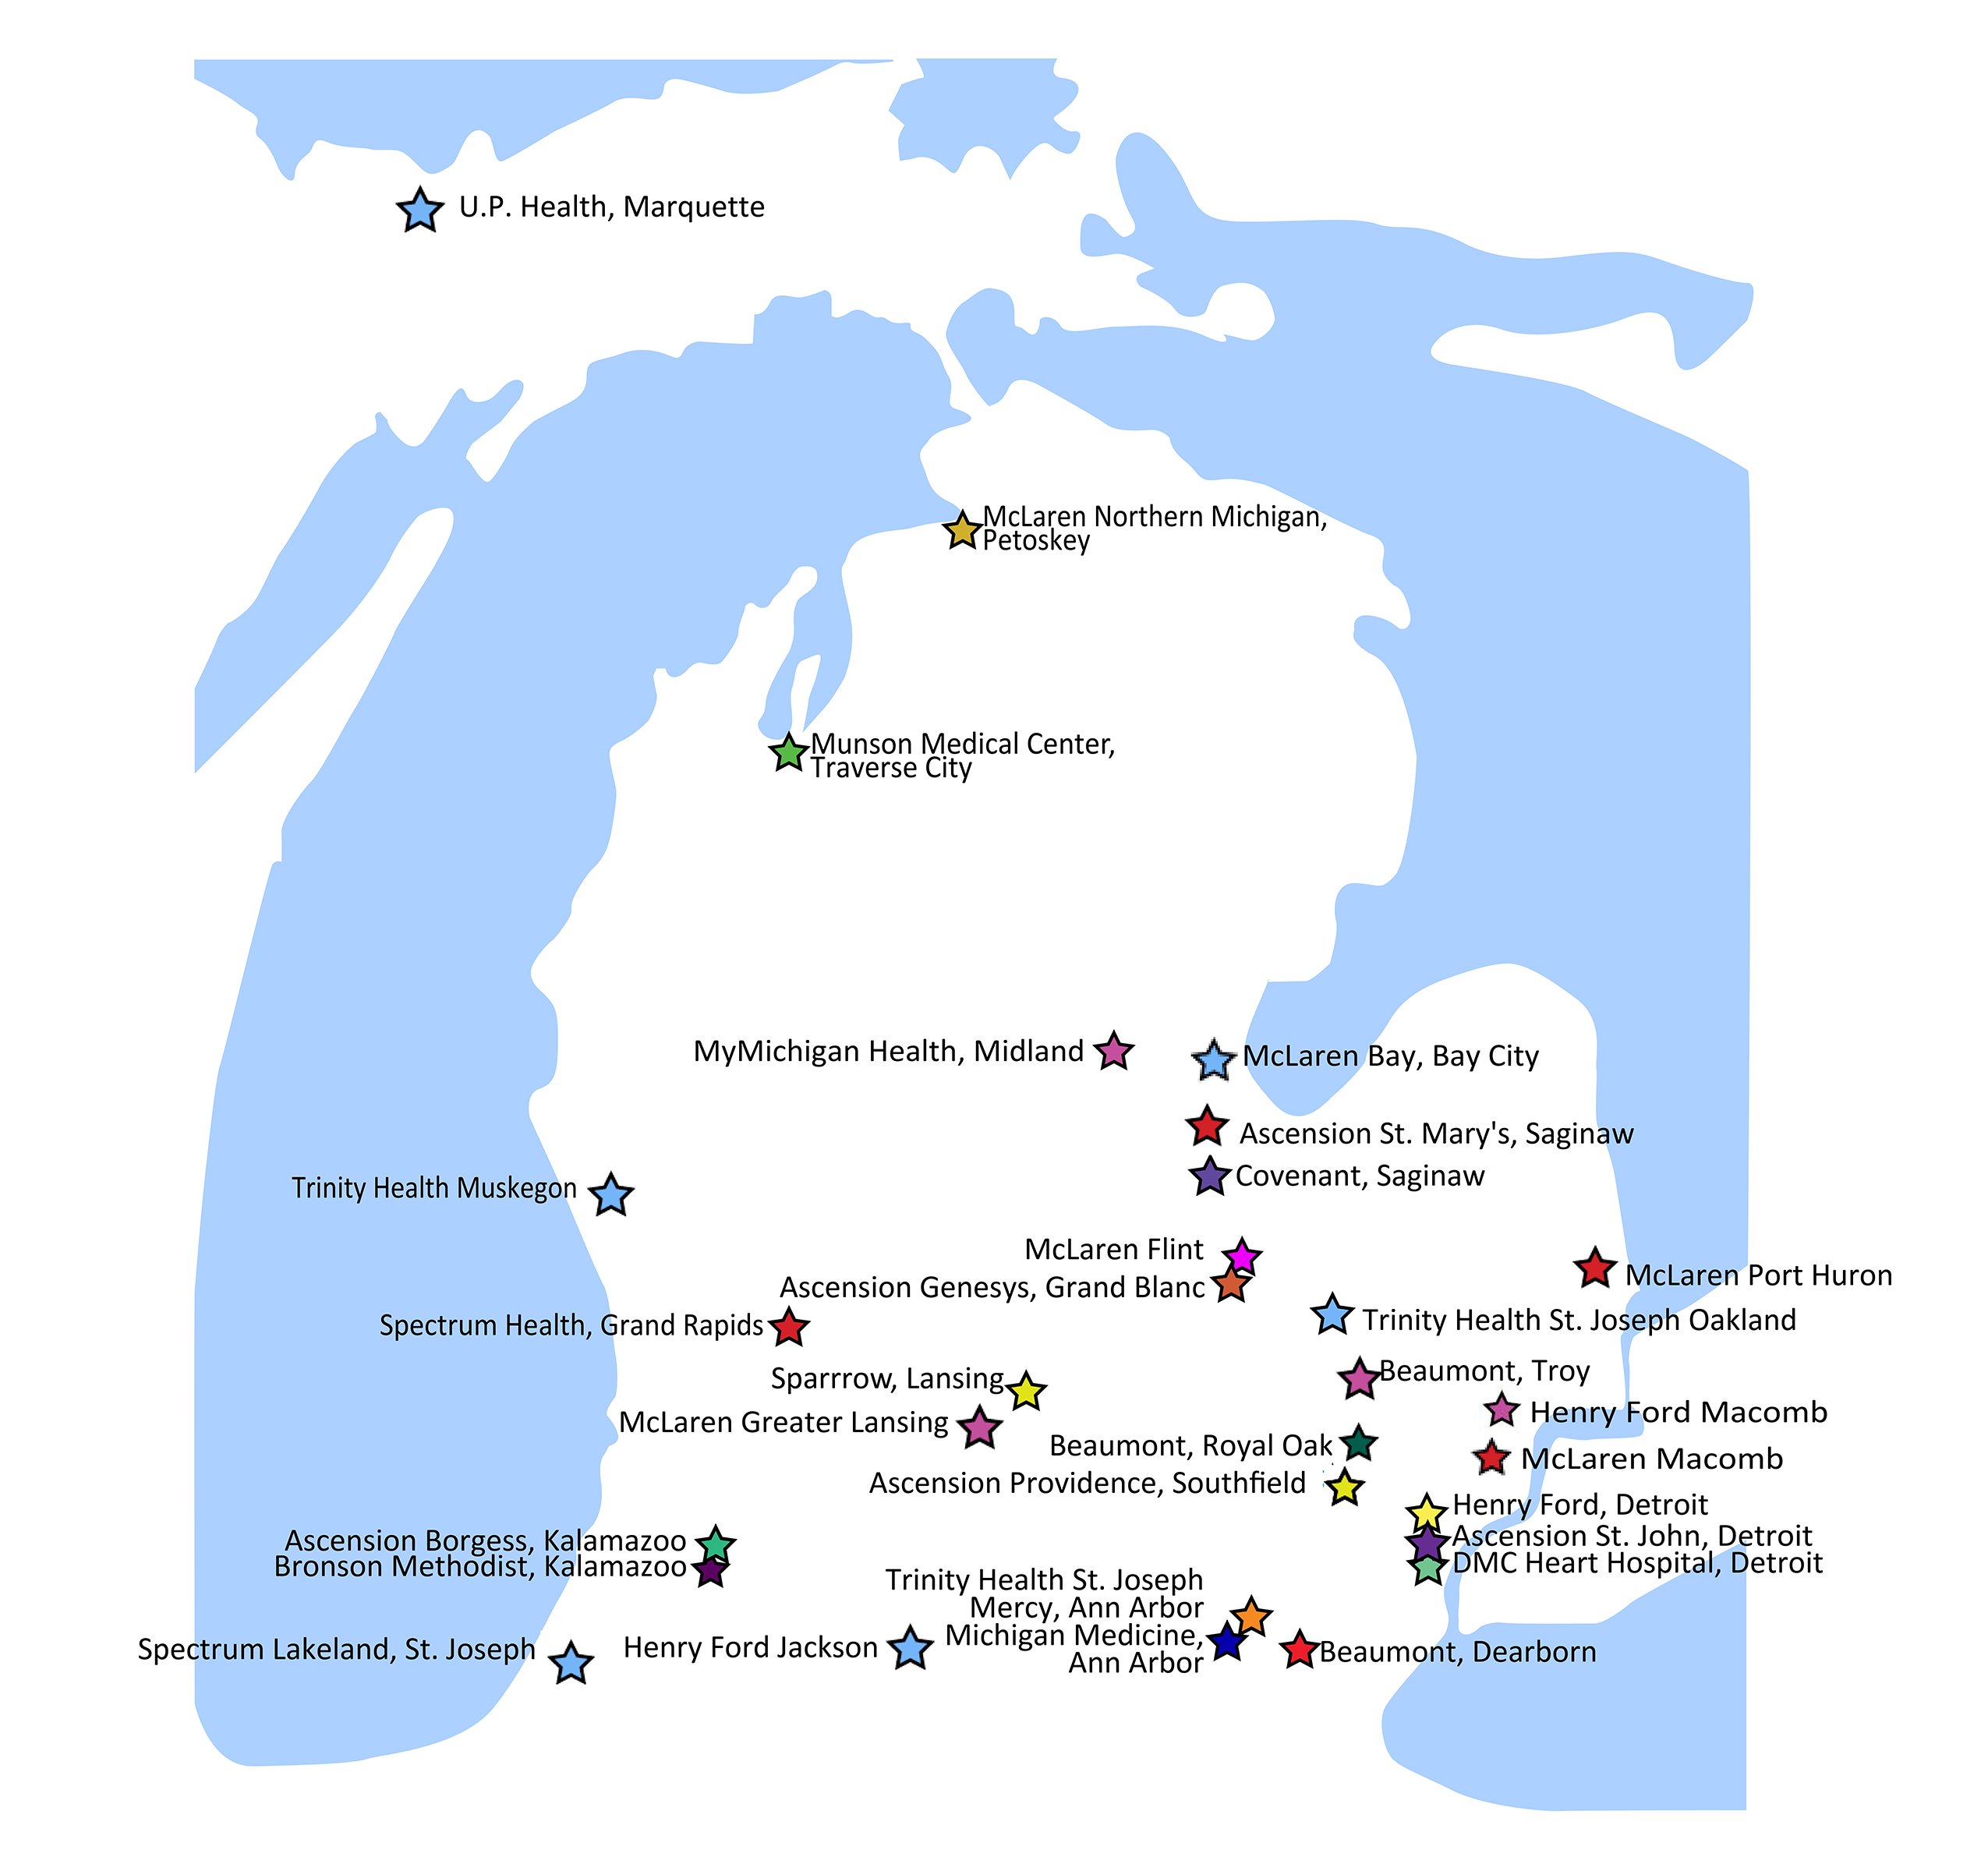 Map of Michigan with stars marking site locations.